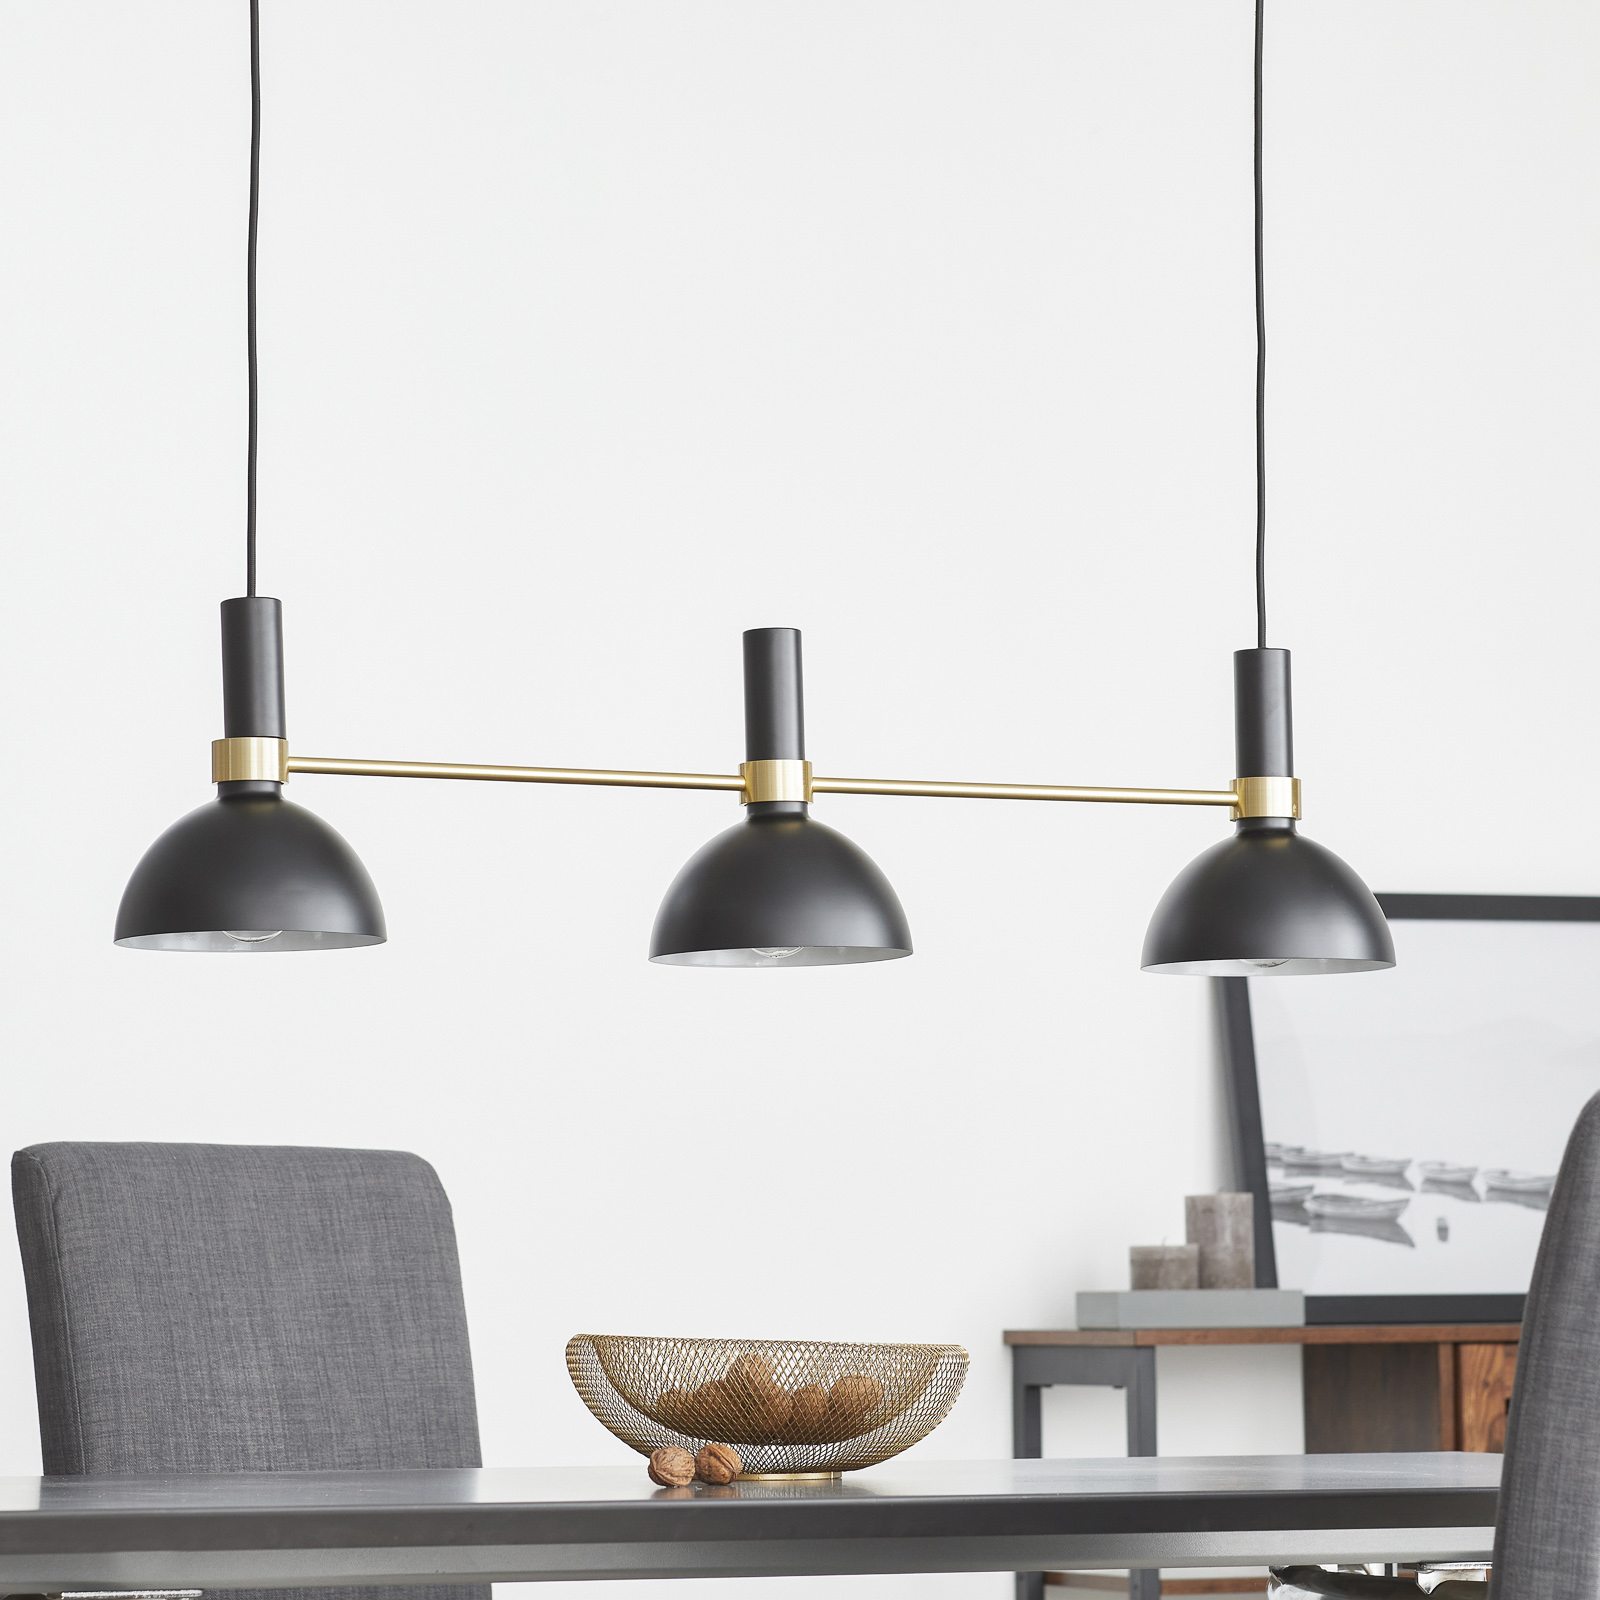 Three-bulb Larry hanging lamp in black and brass